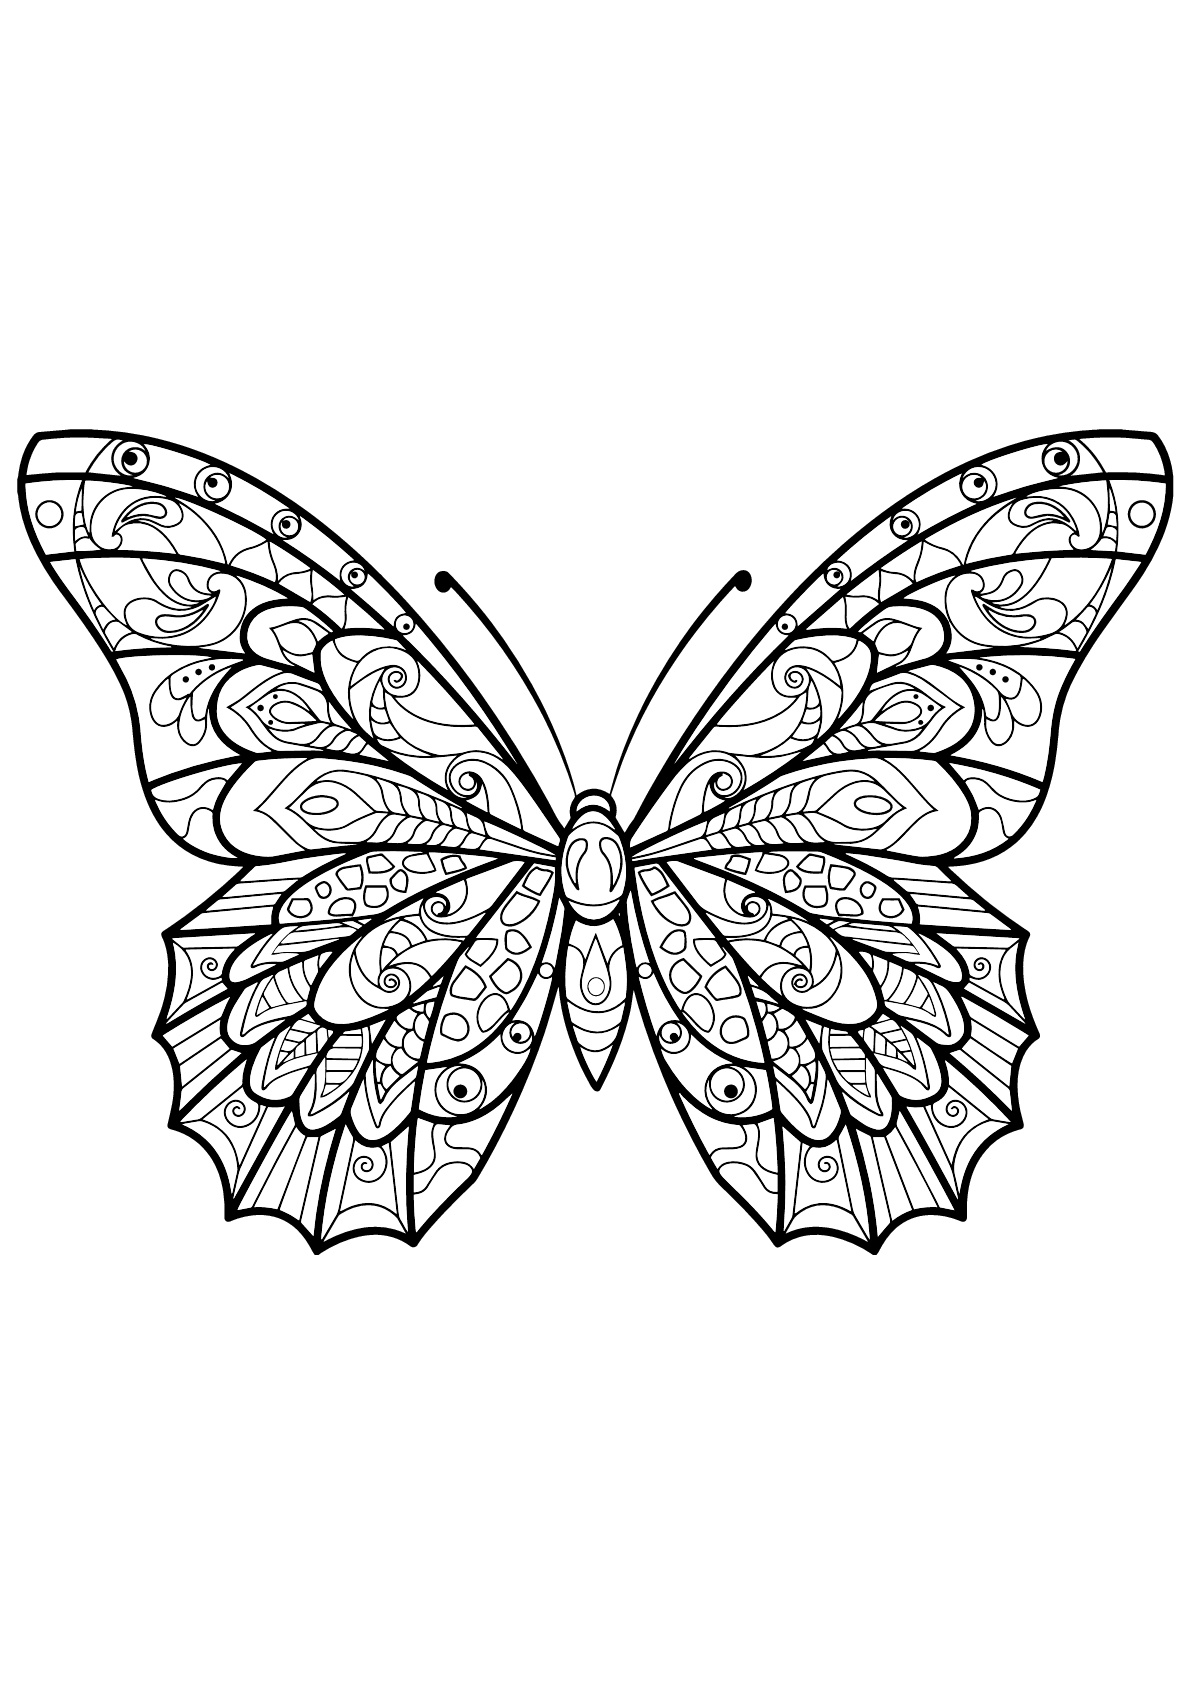 Butterfly beautiful patterns - 3 - Butterflies & insects Adult Coloring ...